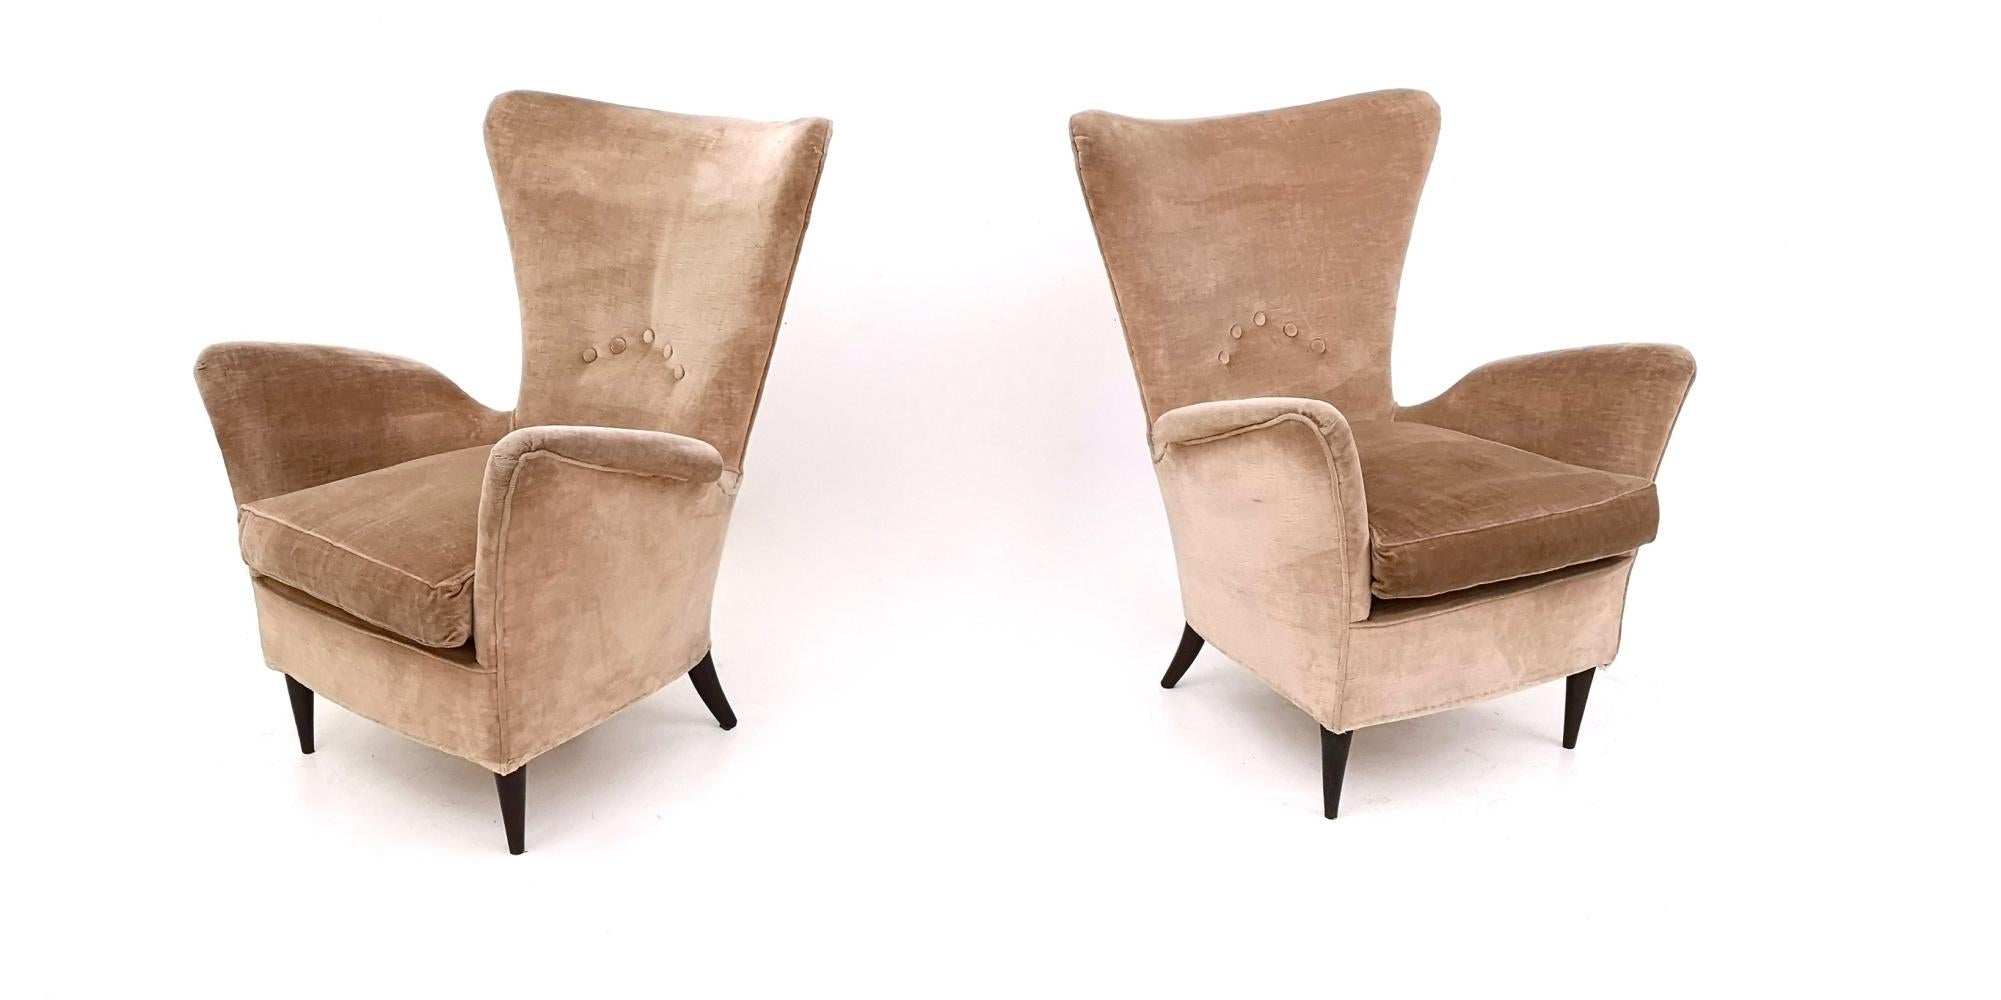 Italian Pair of Beige Velvet Armchairs Ascribable to Gio Ponti for Hotel Bristol